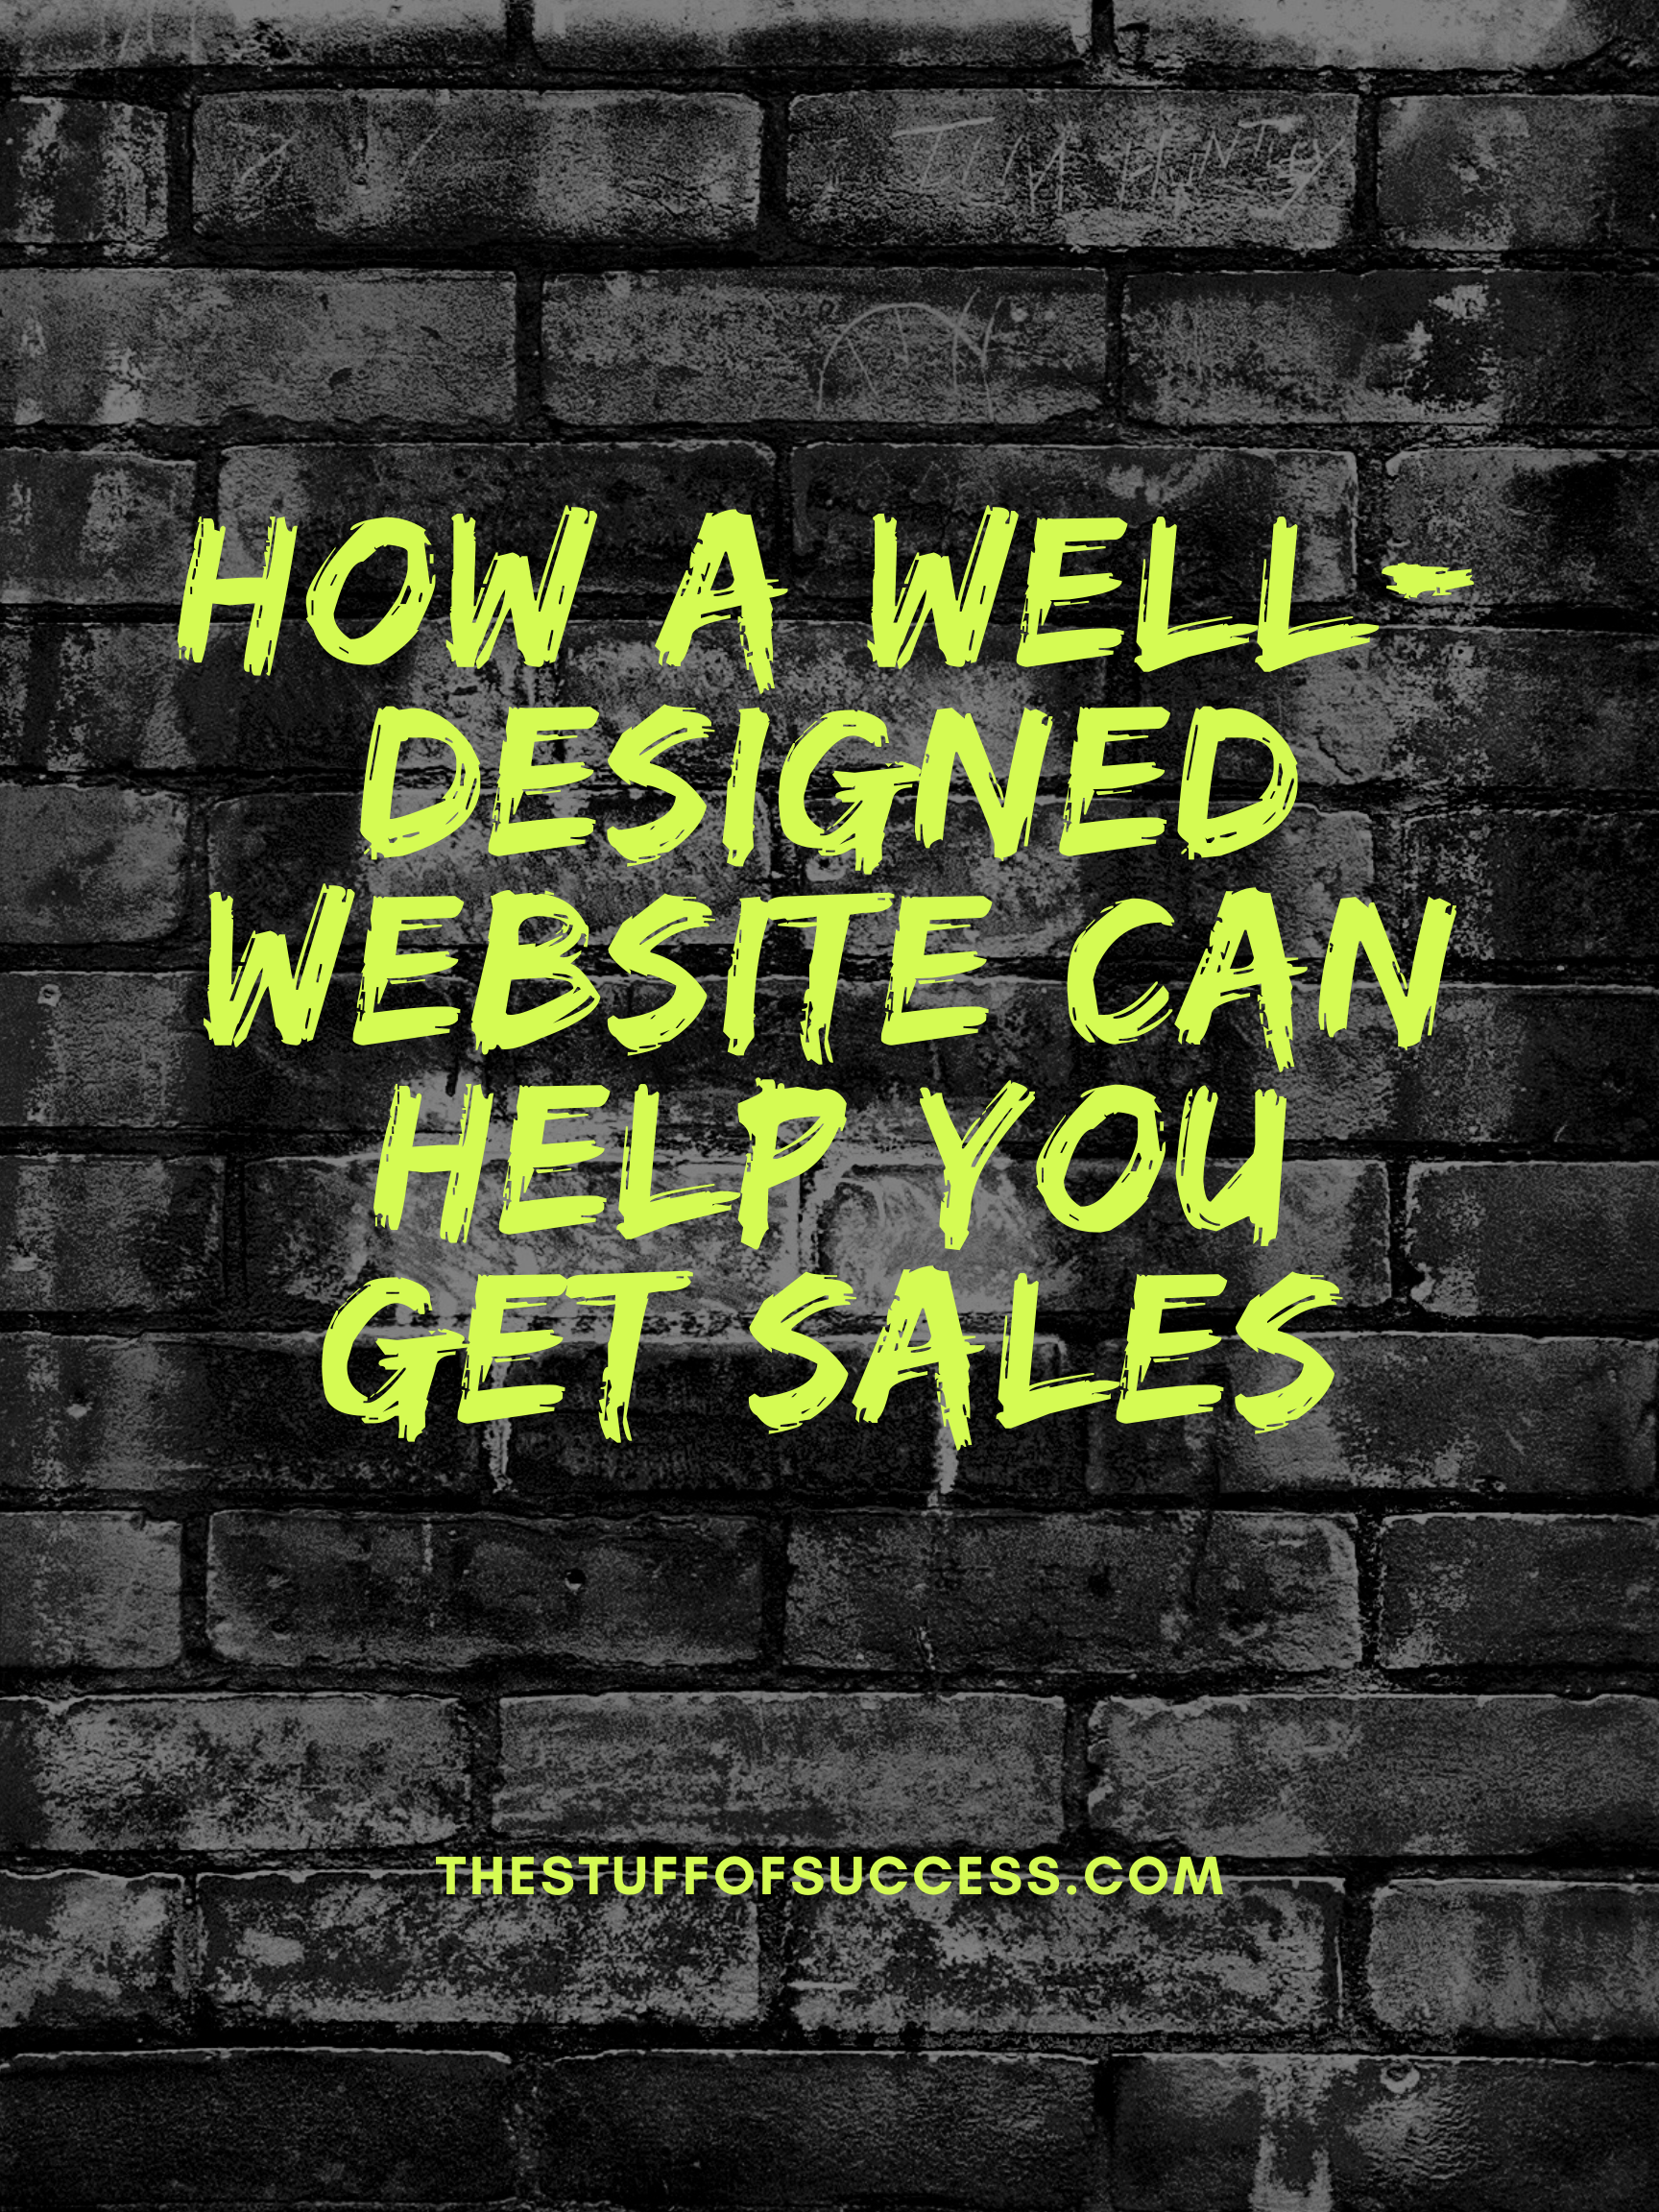 How a Well-Designed Website Can Help You Get Sales